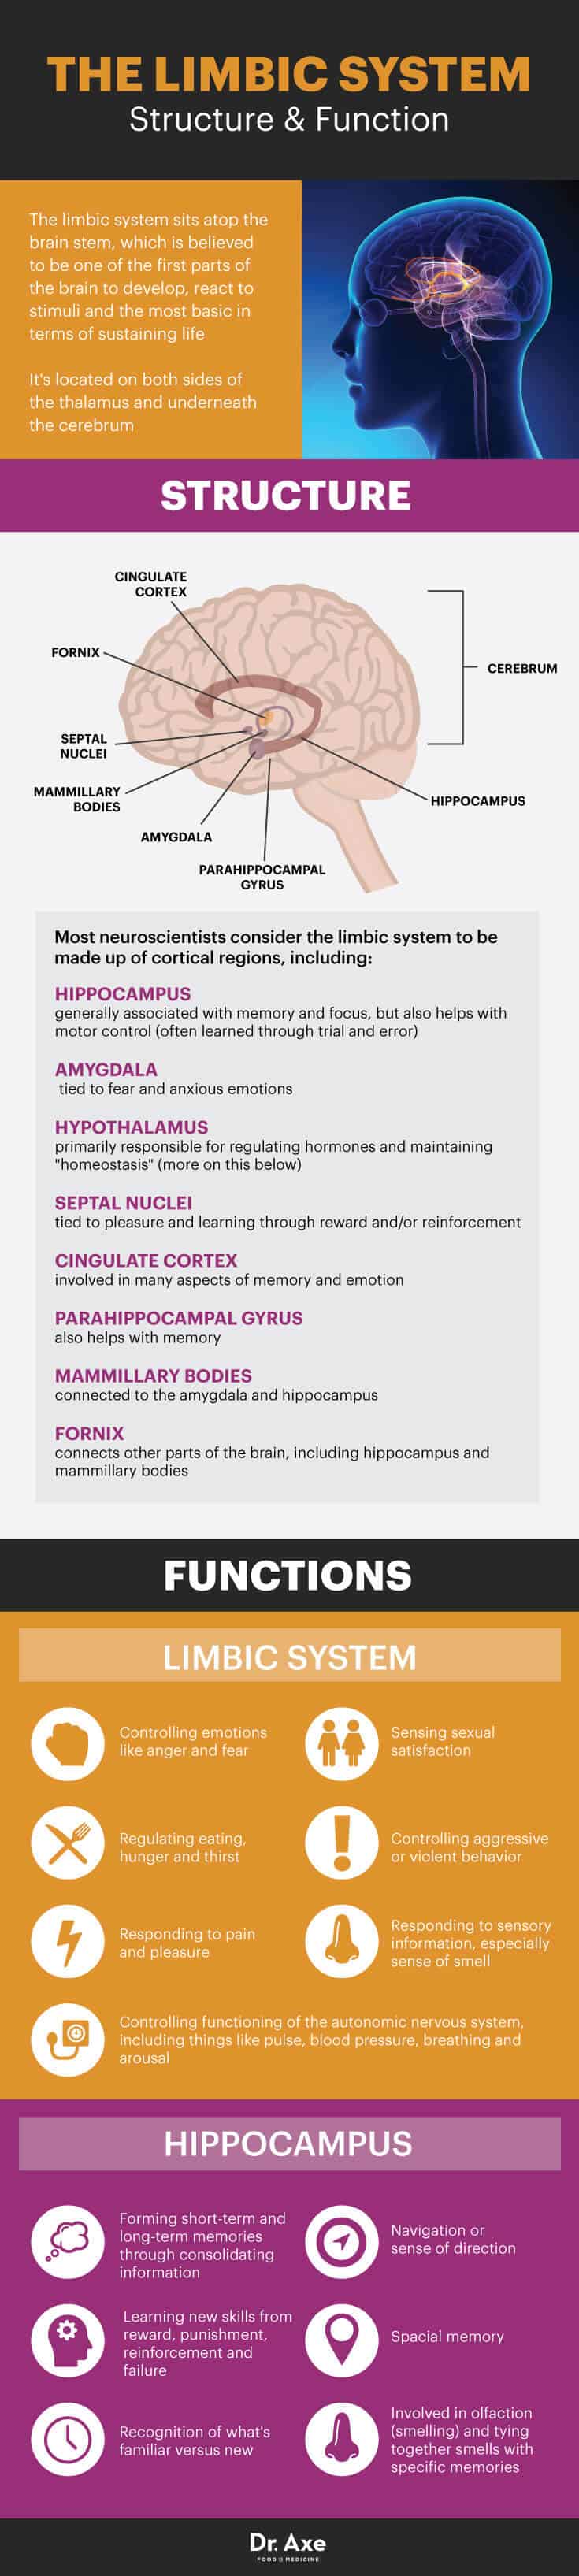 Limbic system structure and functions - Dr. Axe